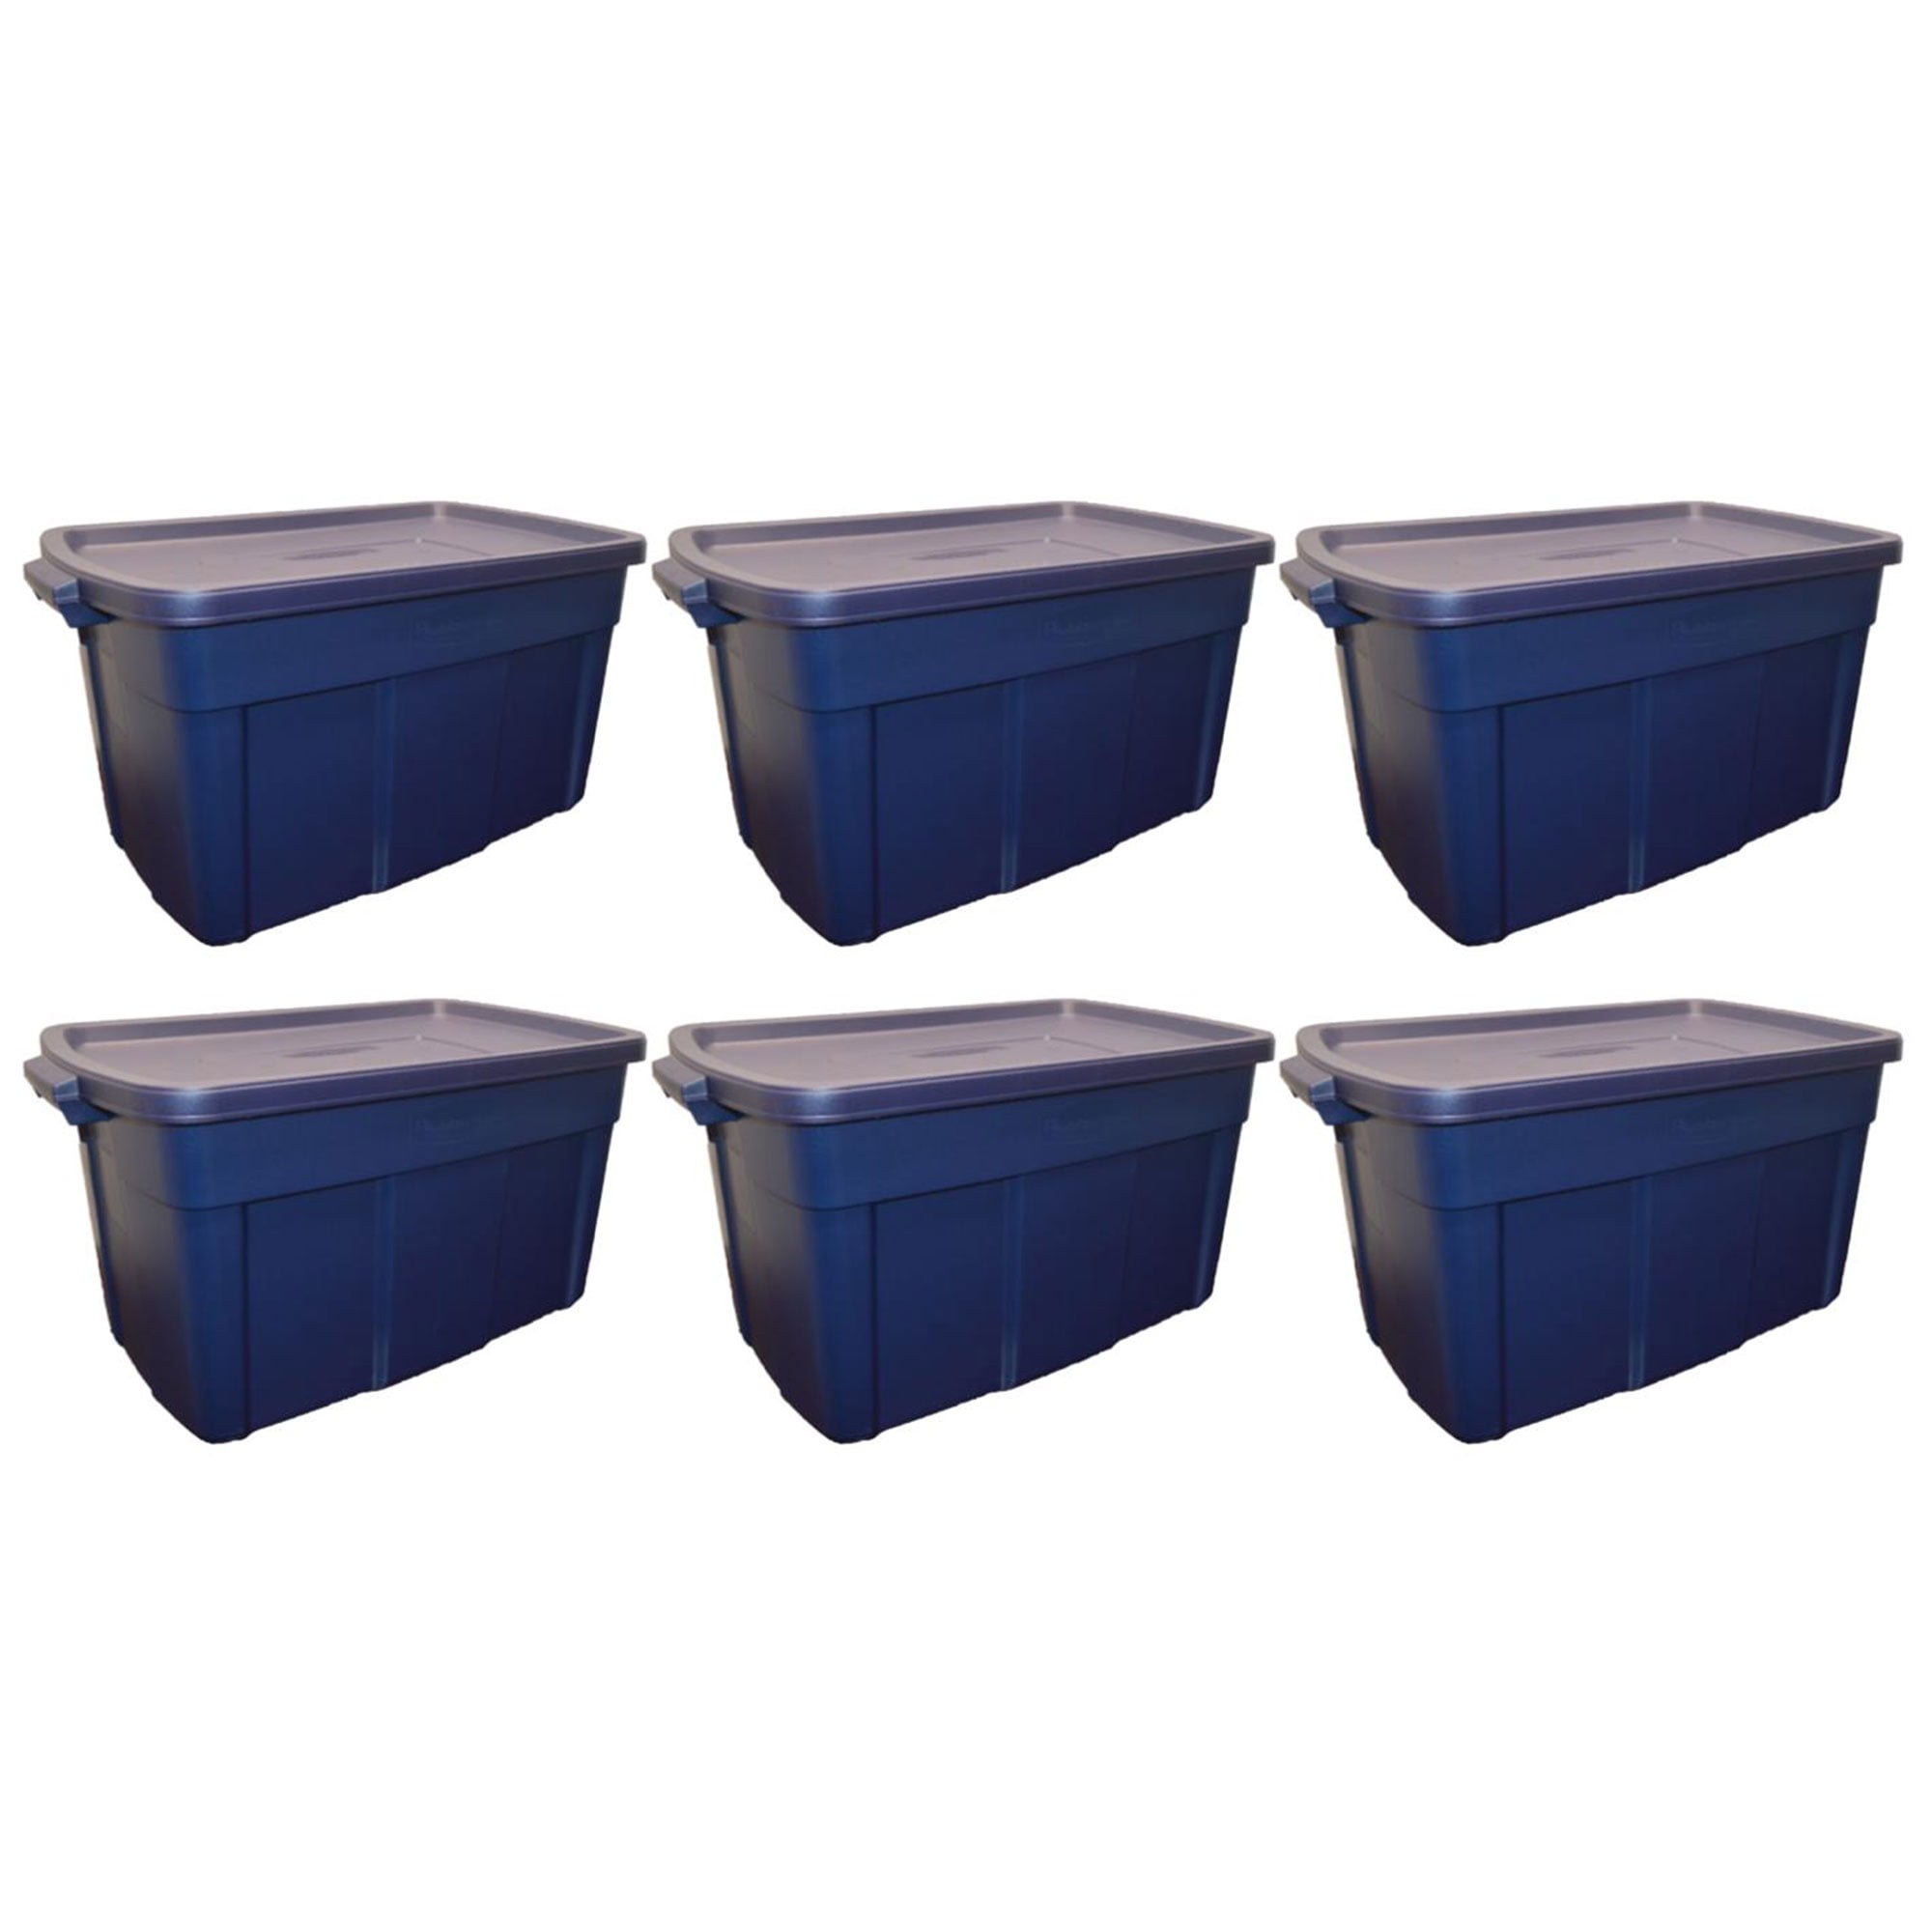 The Container Store 15-3/4 x 19-3/4 x 8-1/8 Large Peacock Tint Stacking Drawer - Each